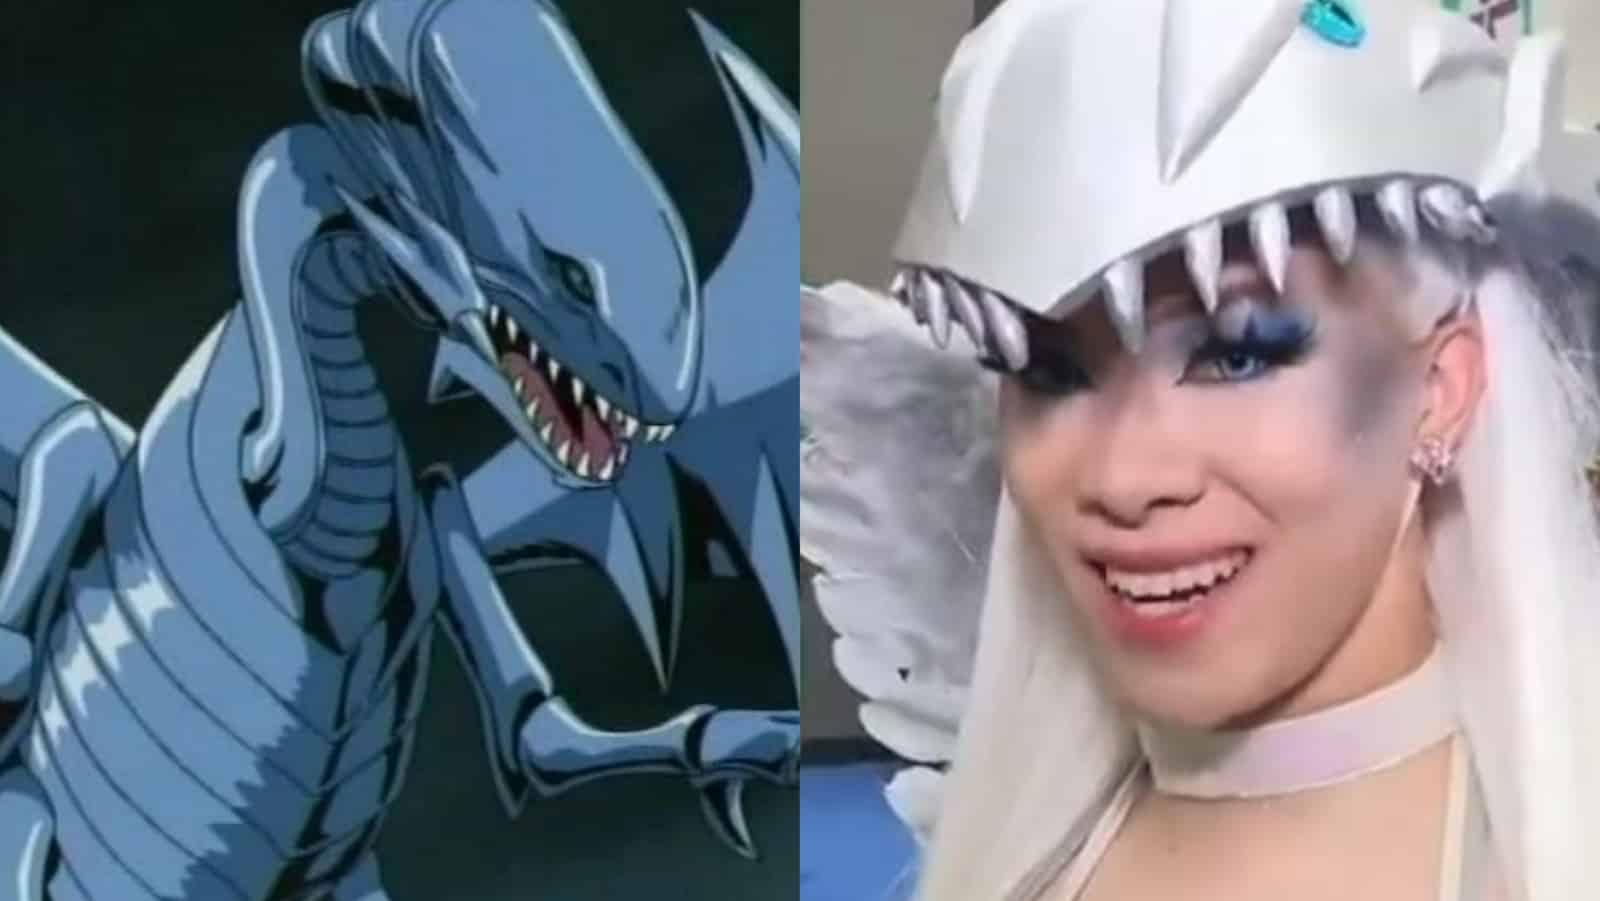 blue eyes white dragon and drag queen anime cosplay at anime expo